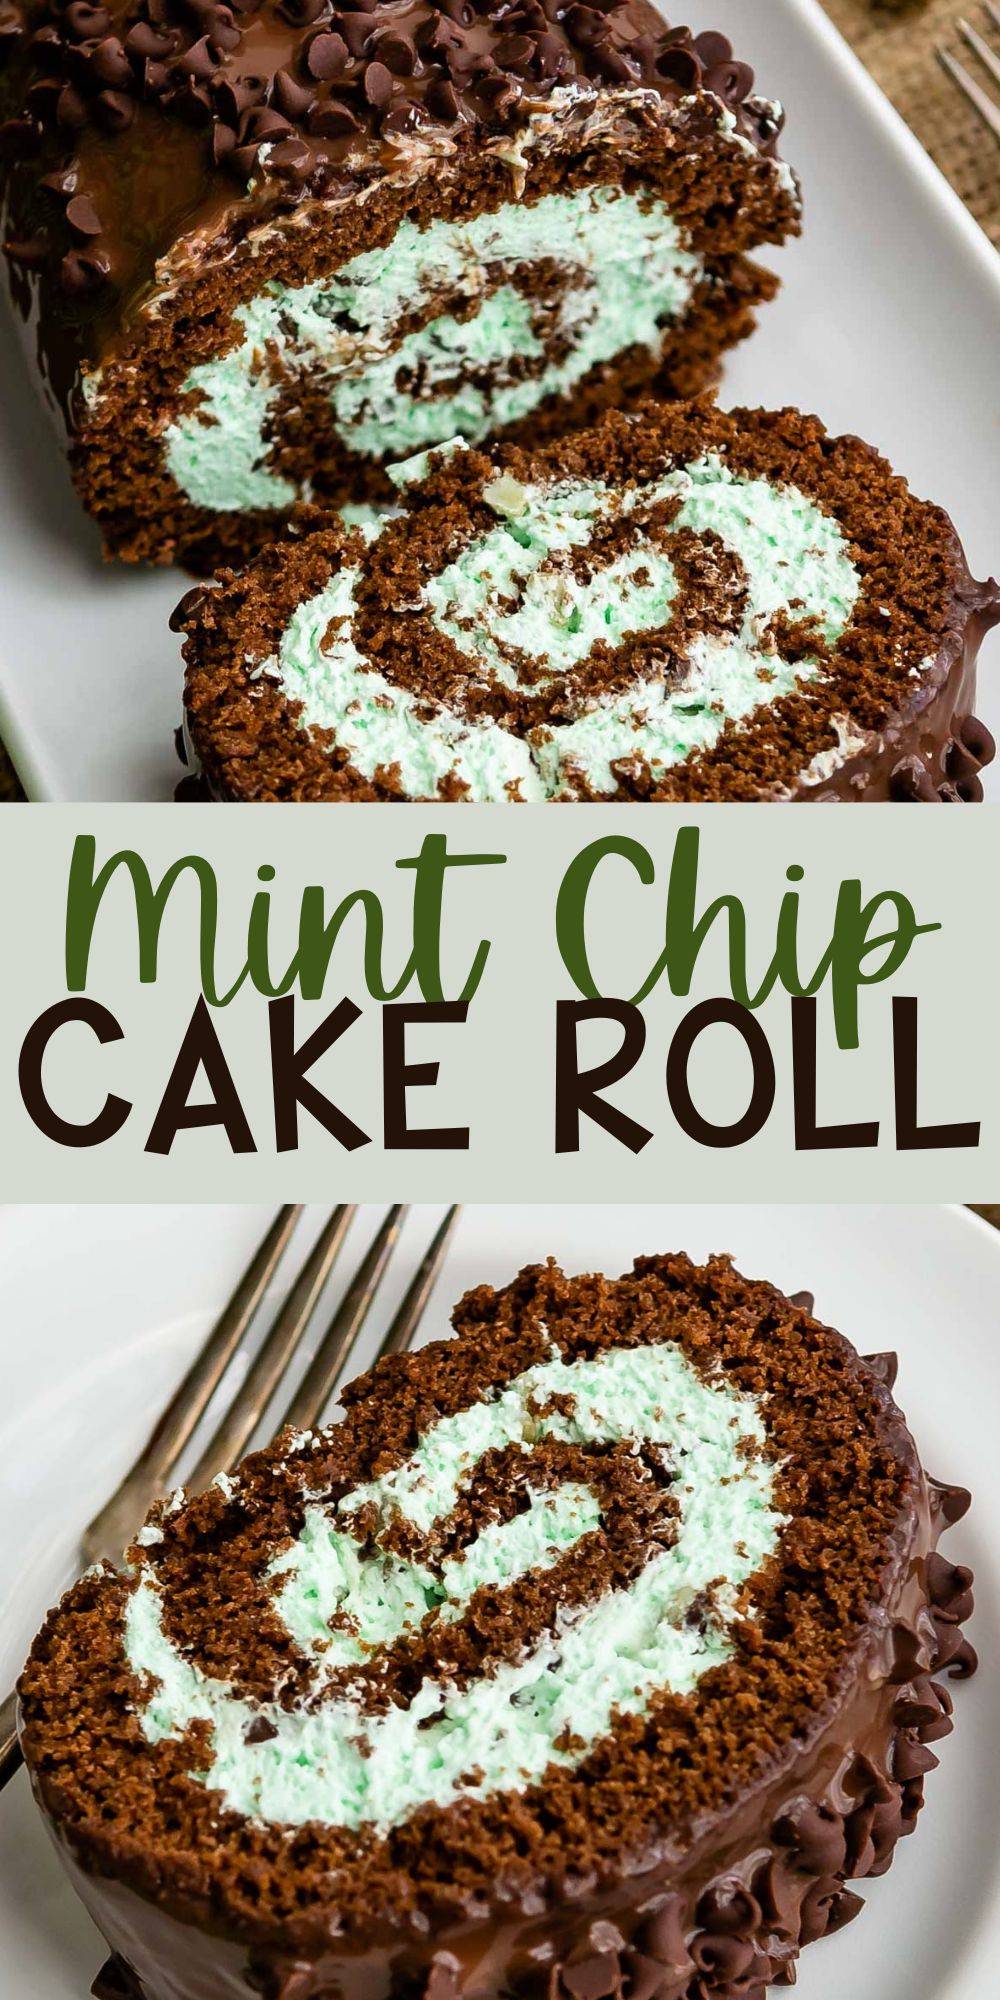 two photos of cake roll covered in chocolate filled with mint filling with words on the image.